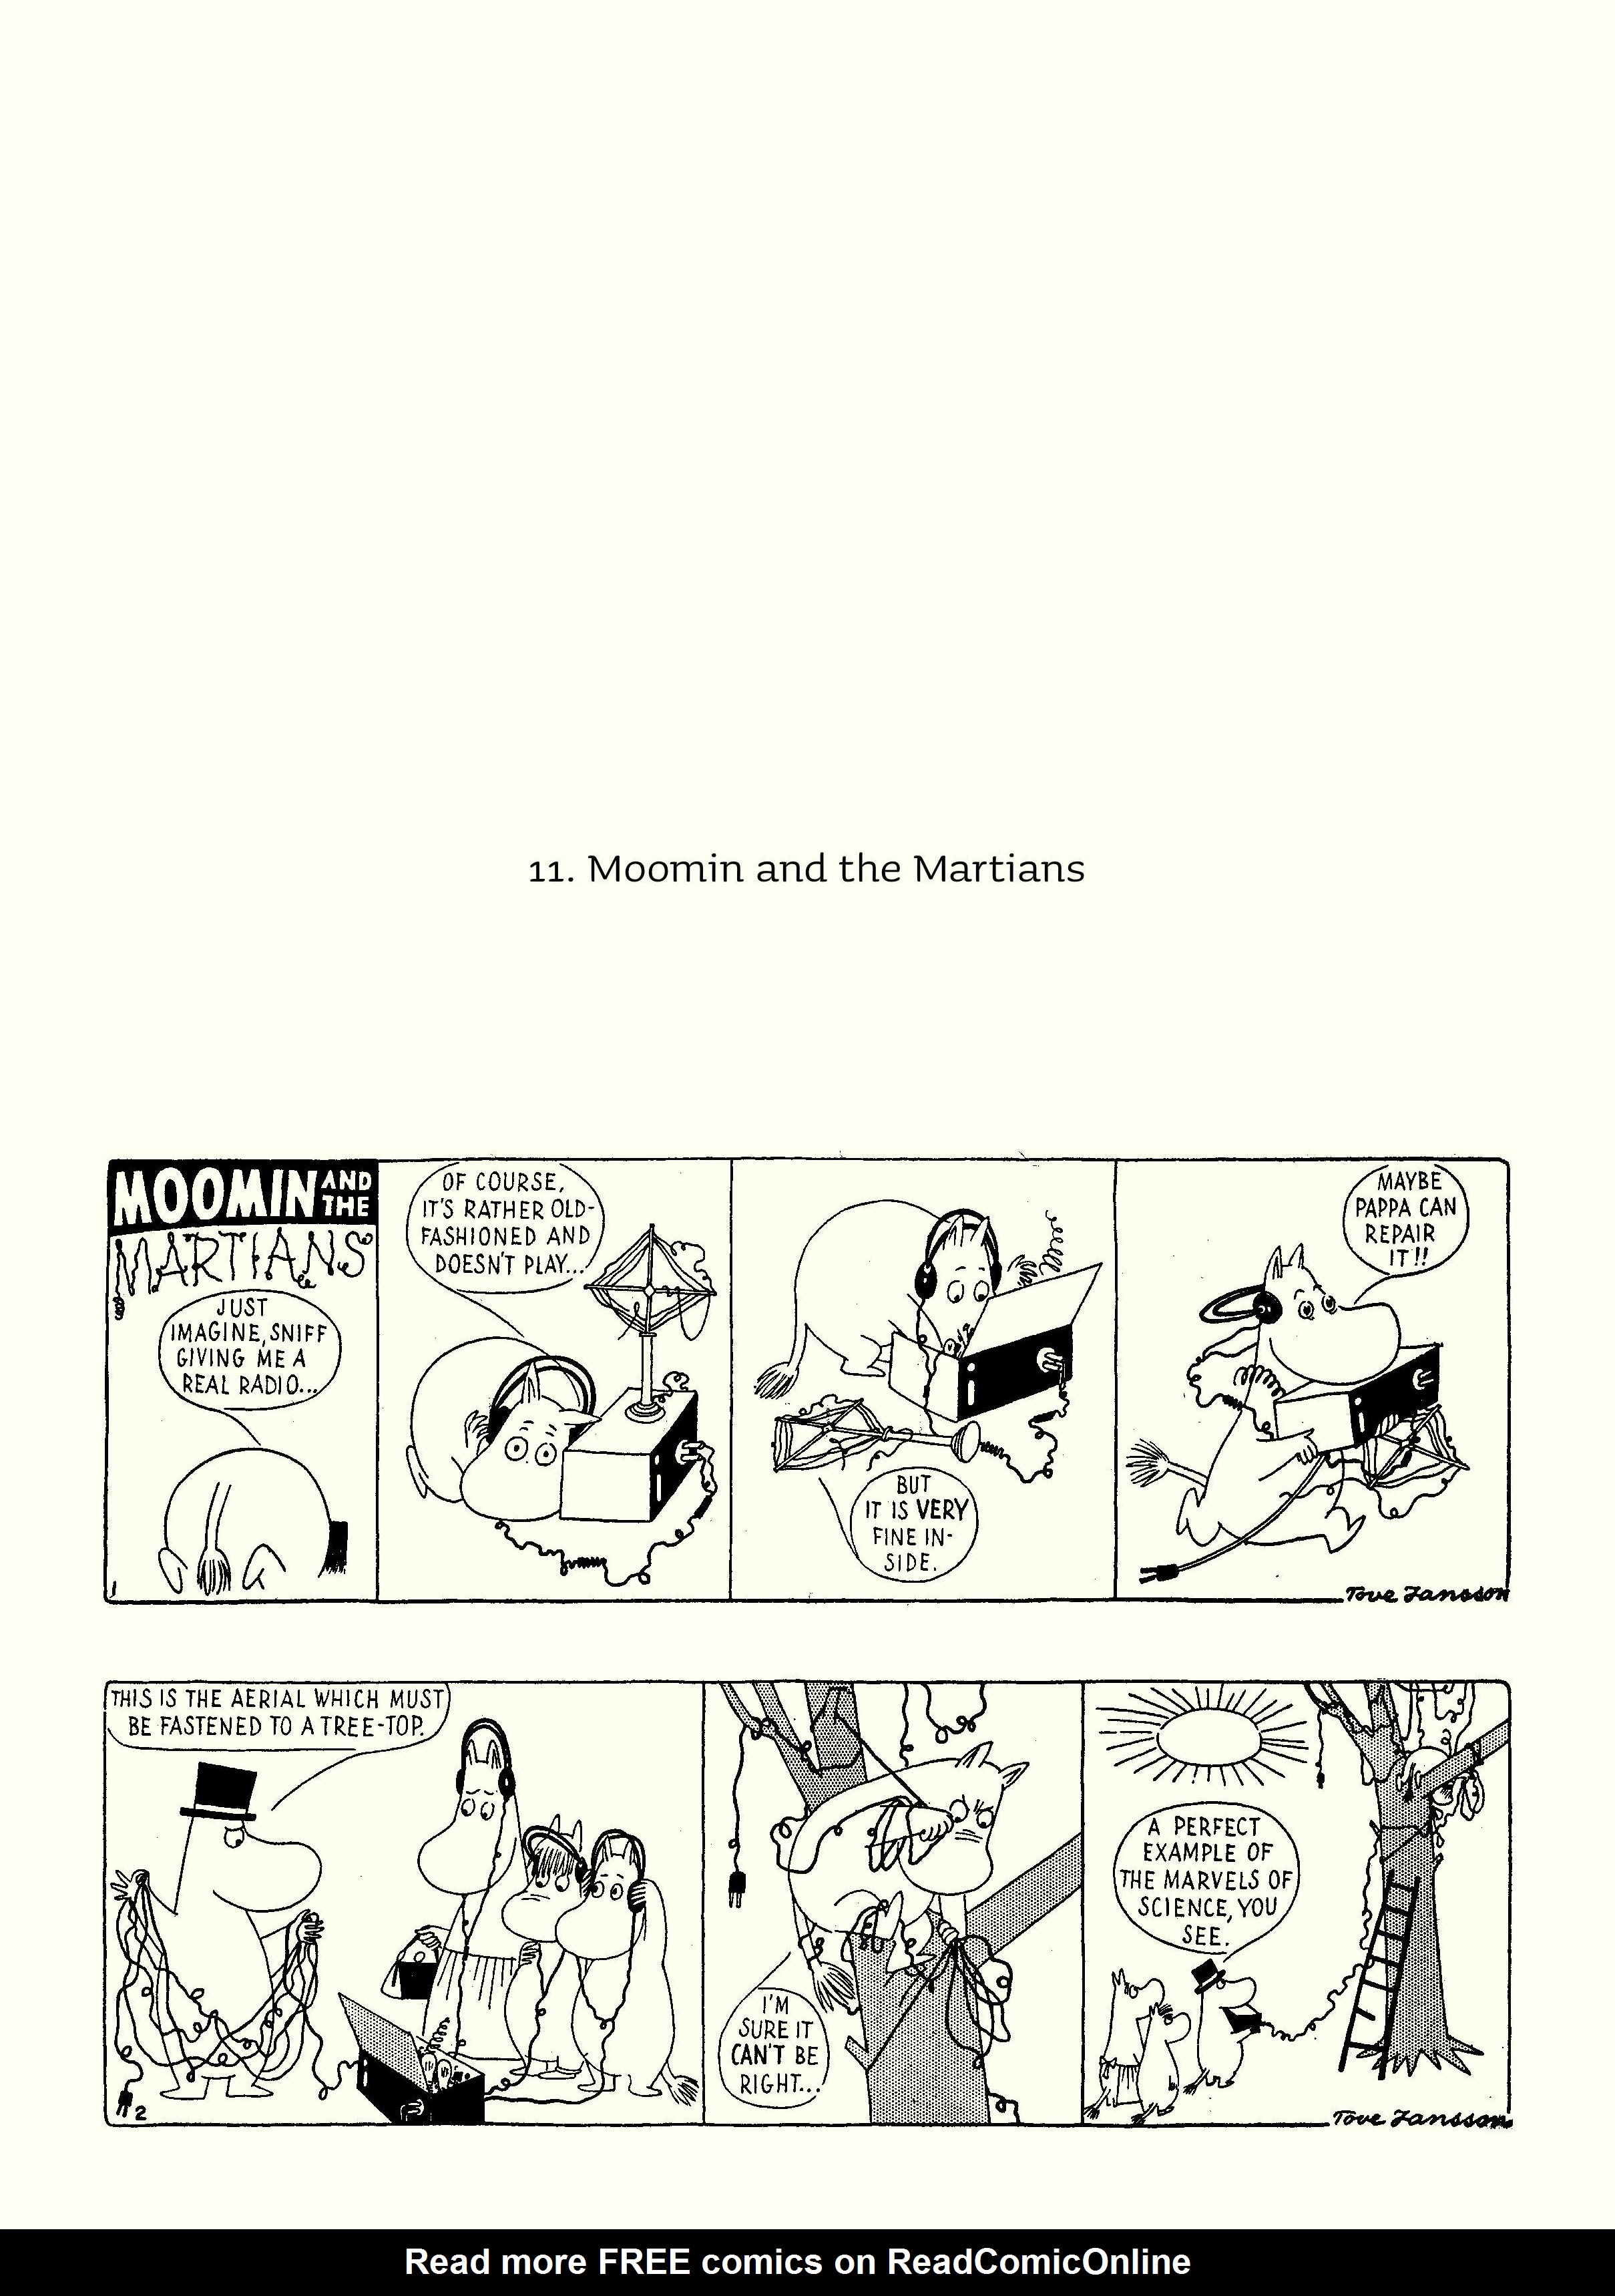 Read online Moomin: The Complete Tove Jansson Comic Strip comic -  Issue # TPB 3 - 37